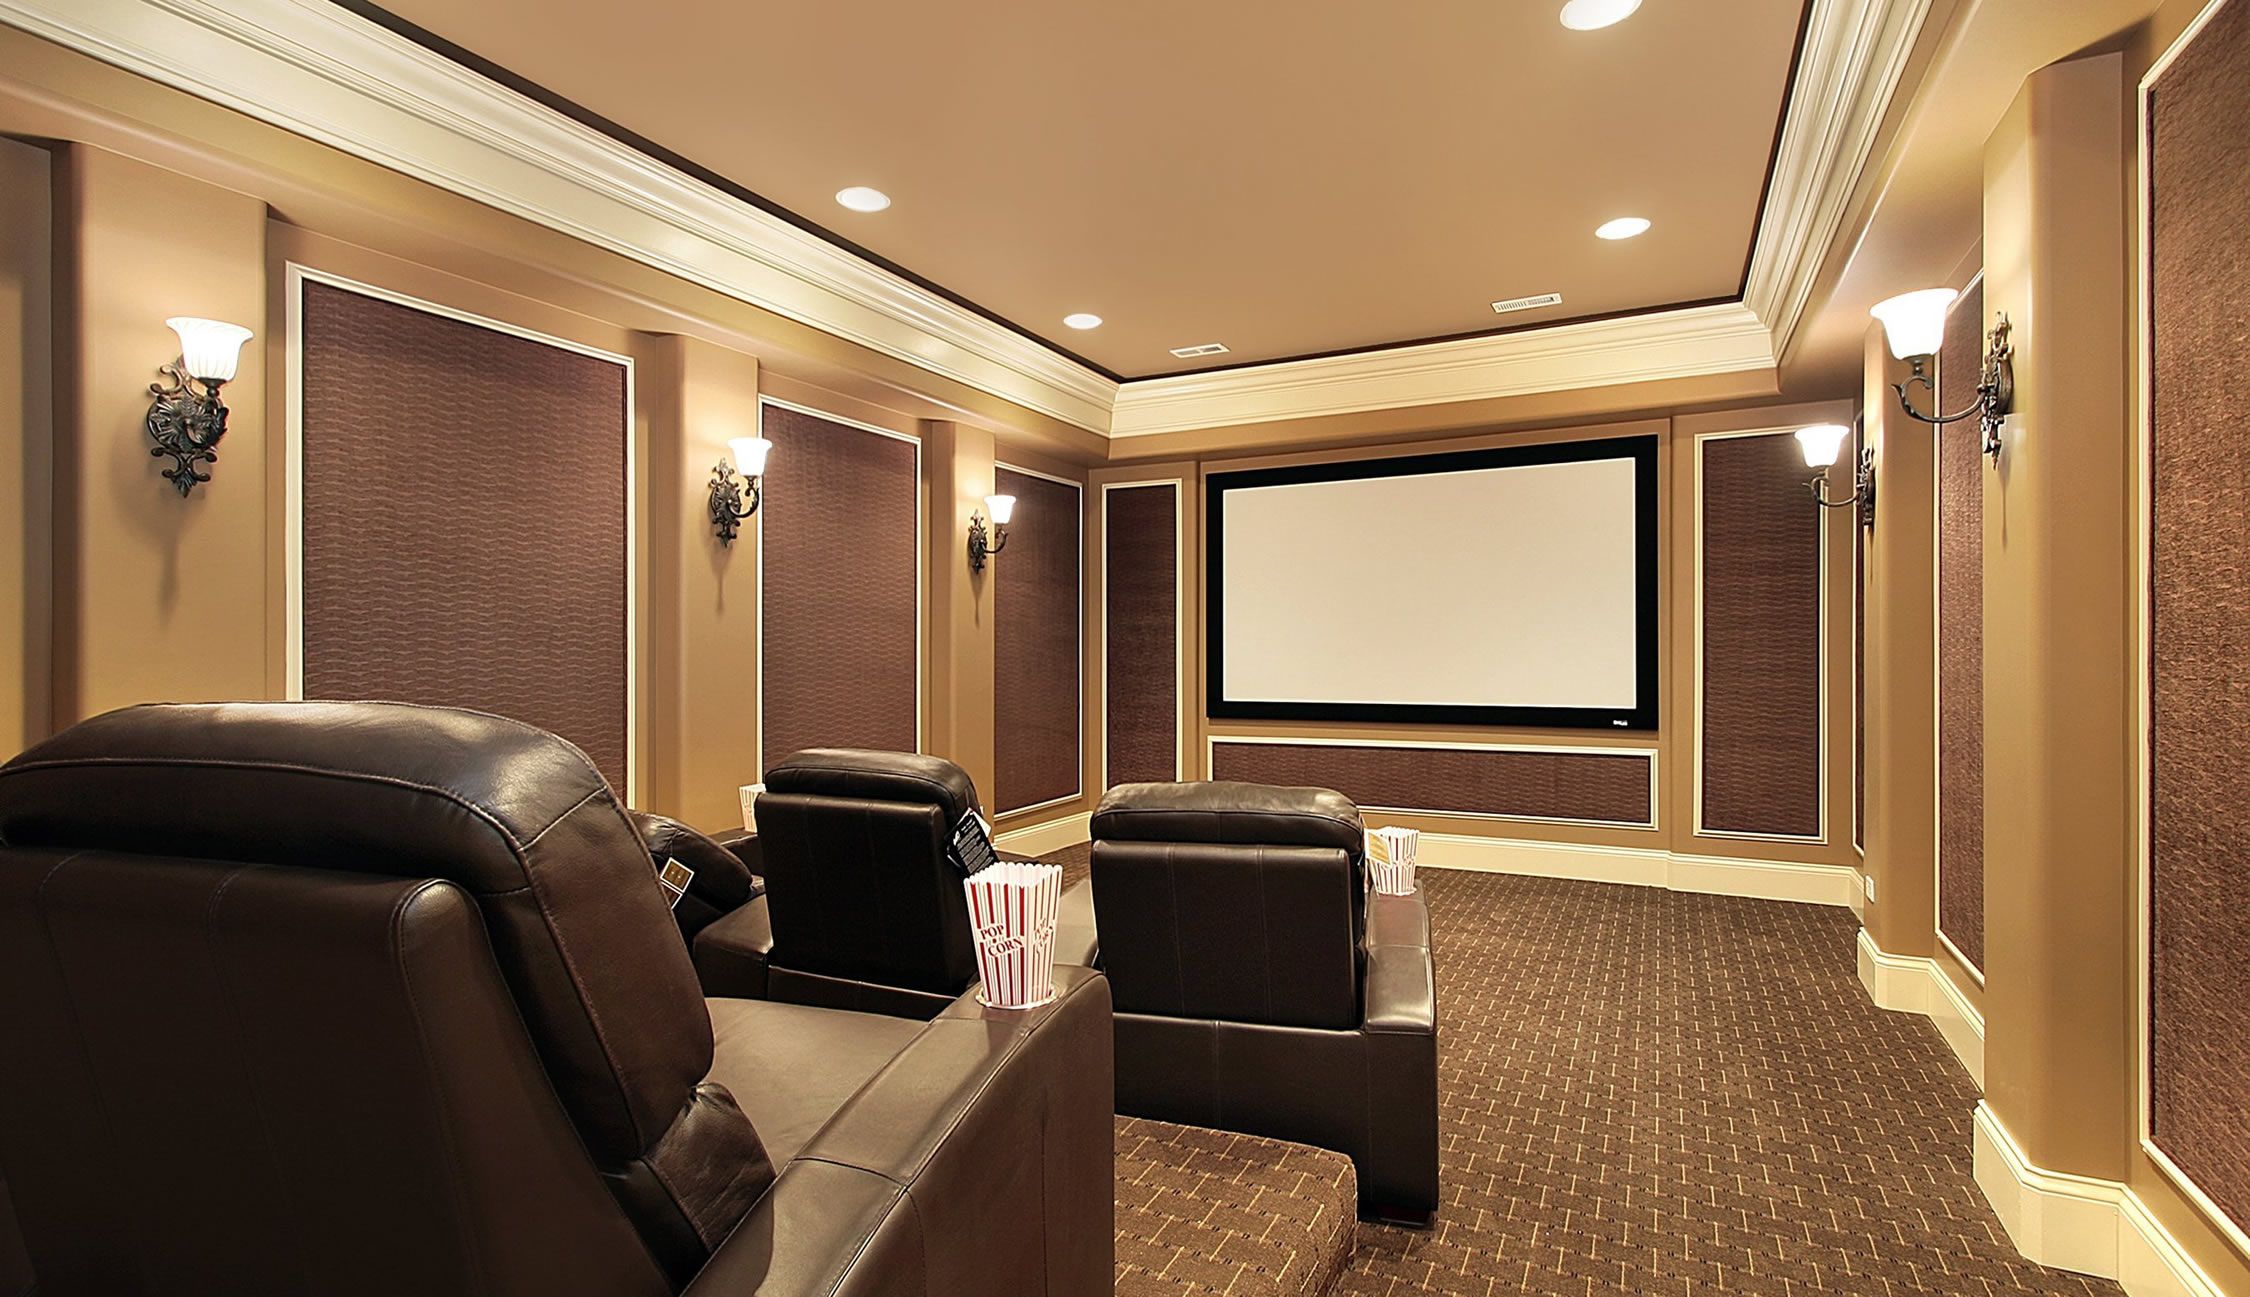 Dedicated home theater with high-performance audio, theater seating and acoustic treatments